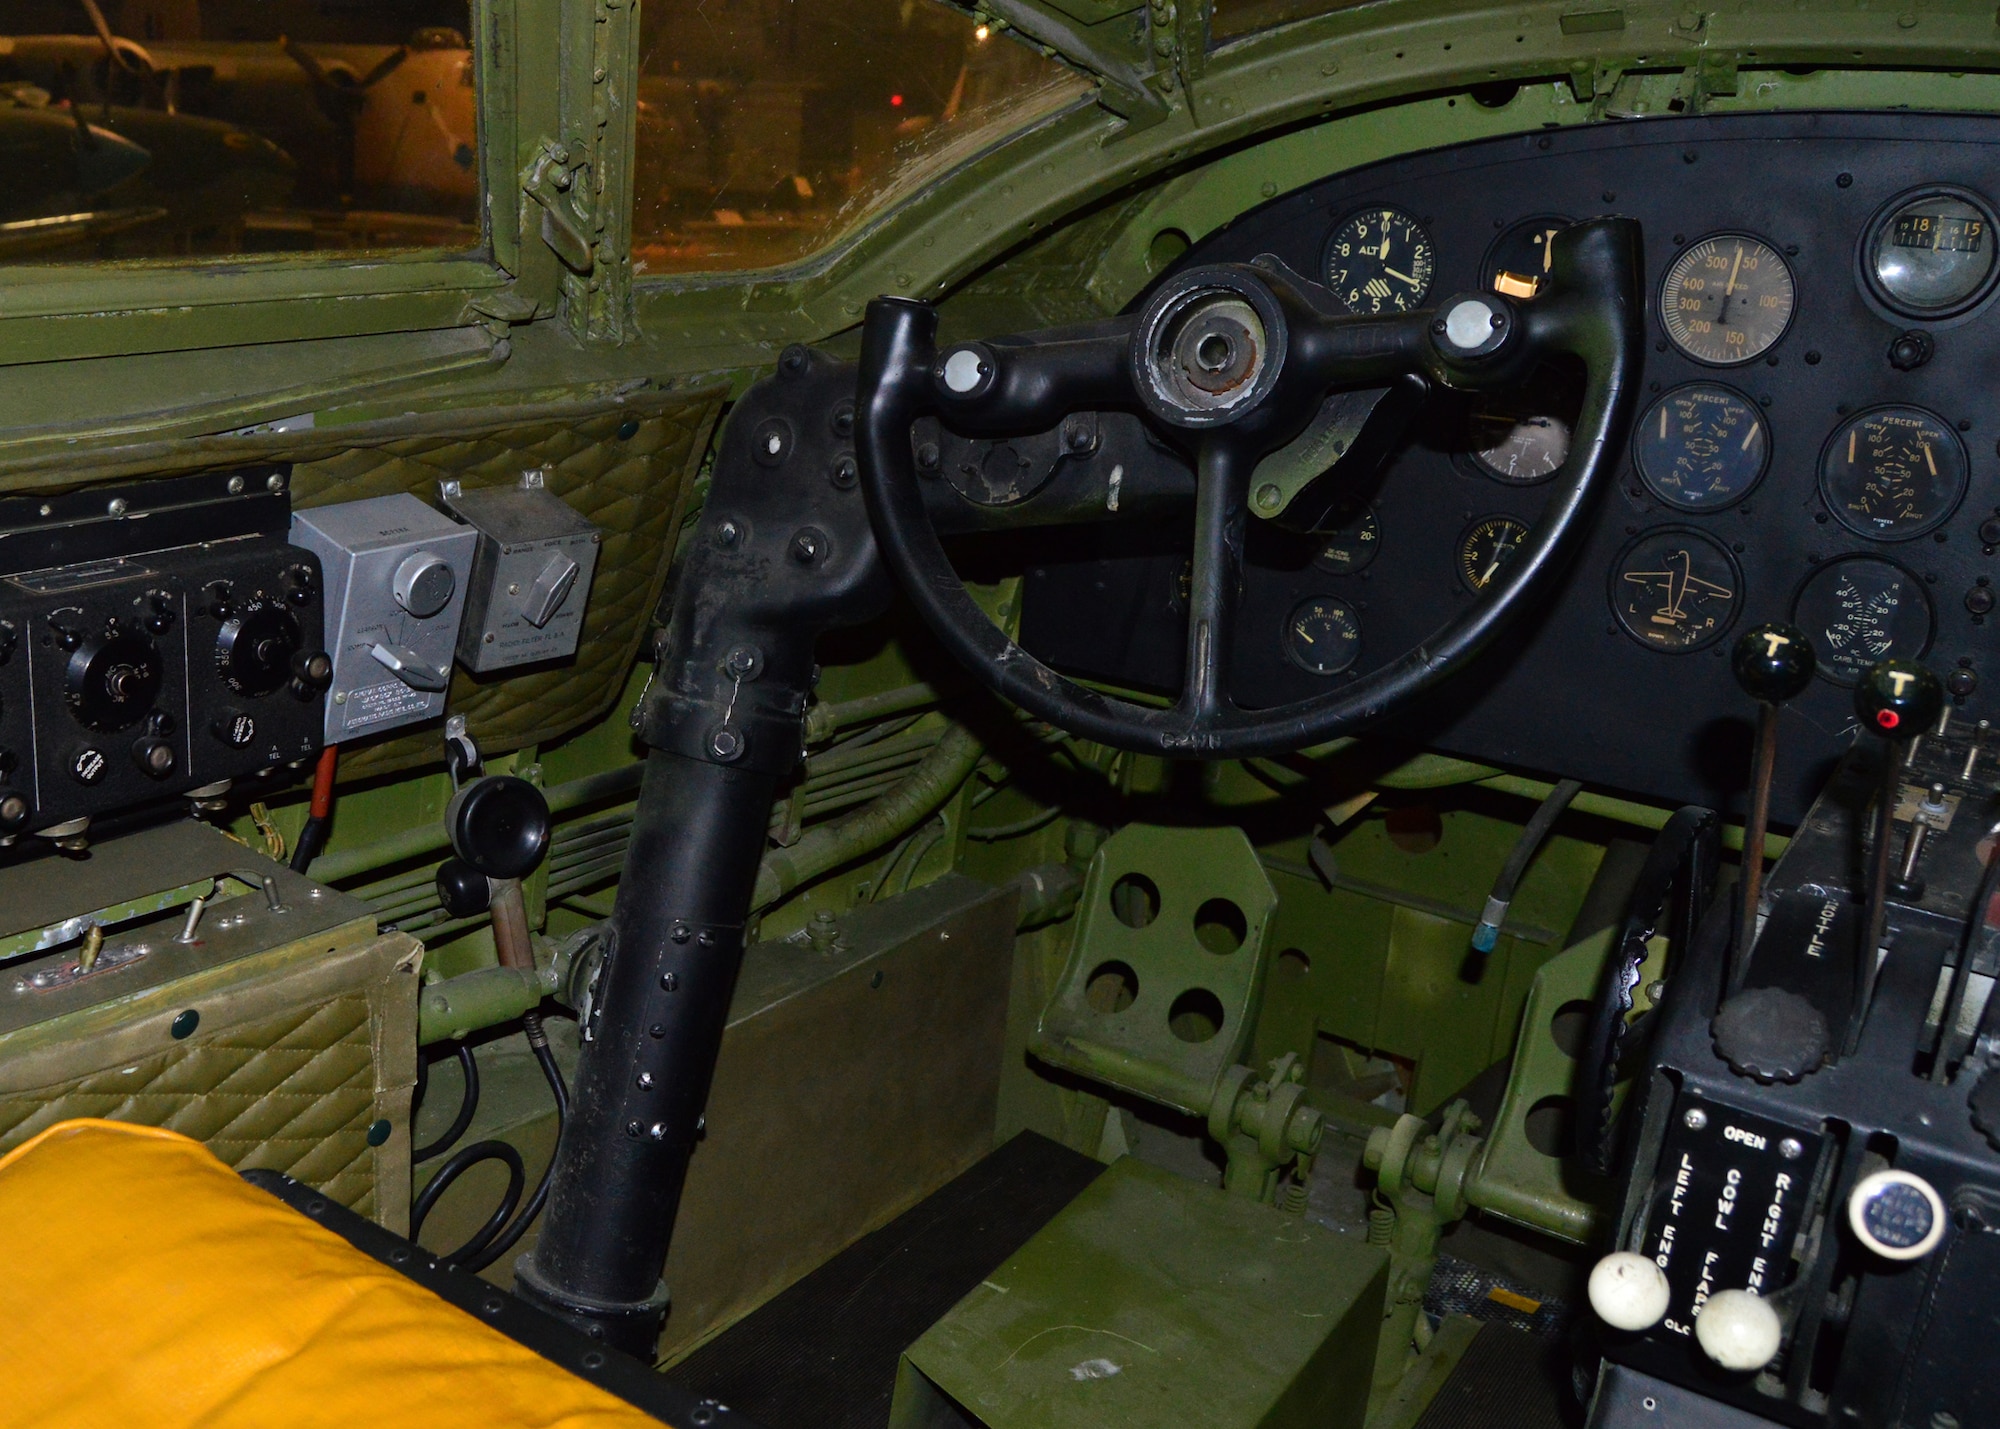 DAYTON, Ohio - Martin B-26G Marauder pilot position in the WWII Gallery at the National Museum of the U.S. Air Force. (U.S. Air Force photo)